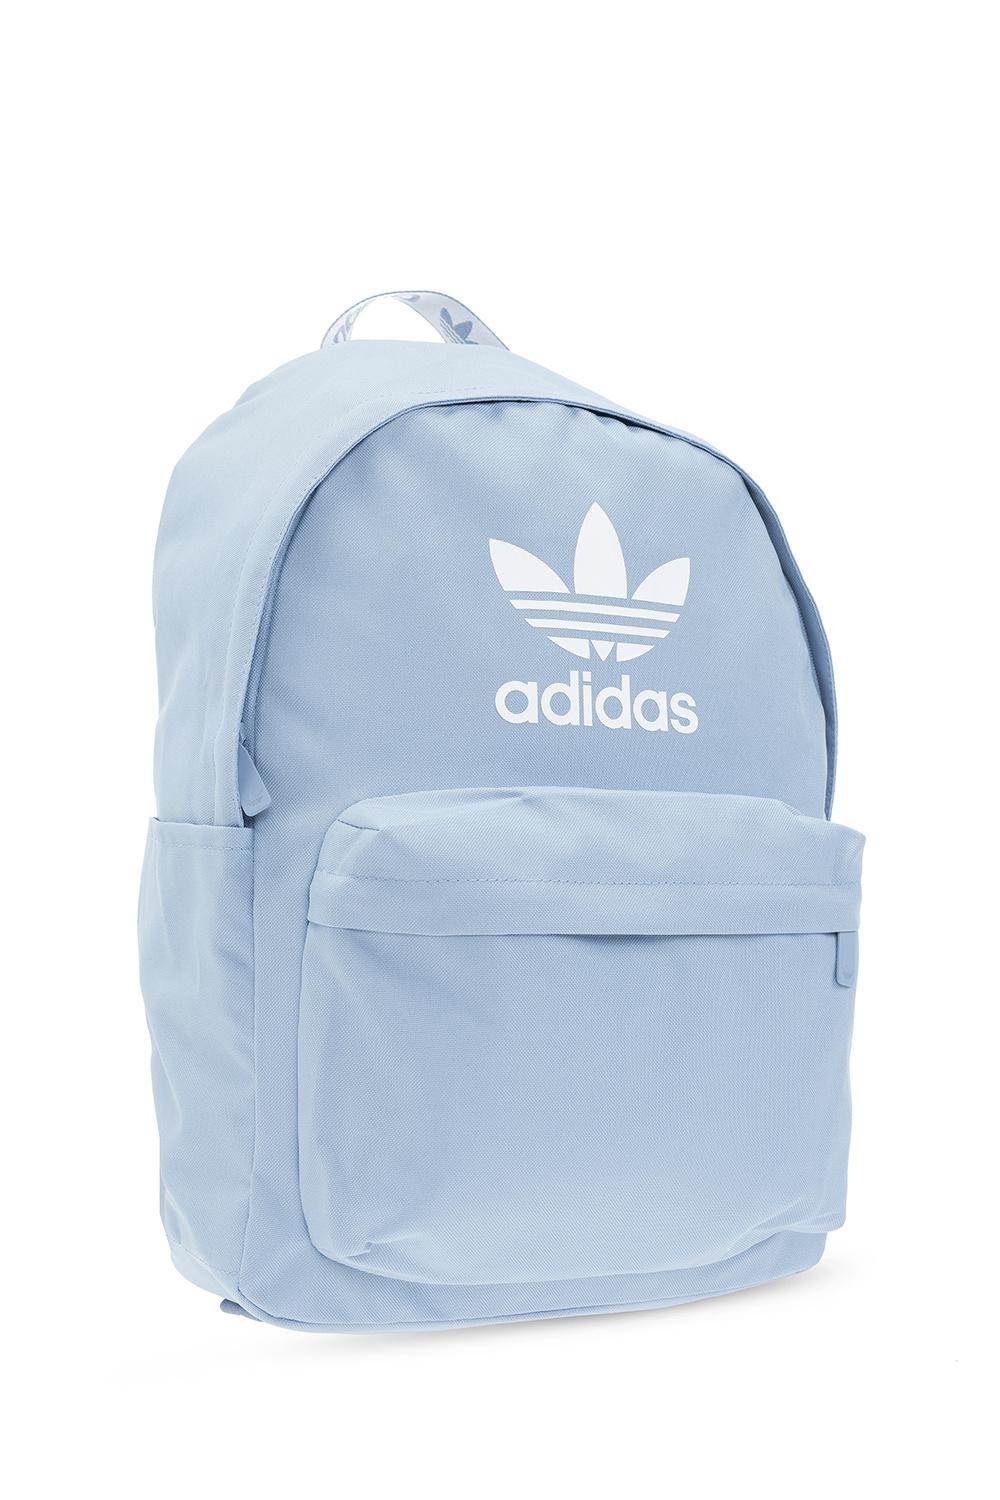 adidas Originals Backpack With Blue for Men | Lyst